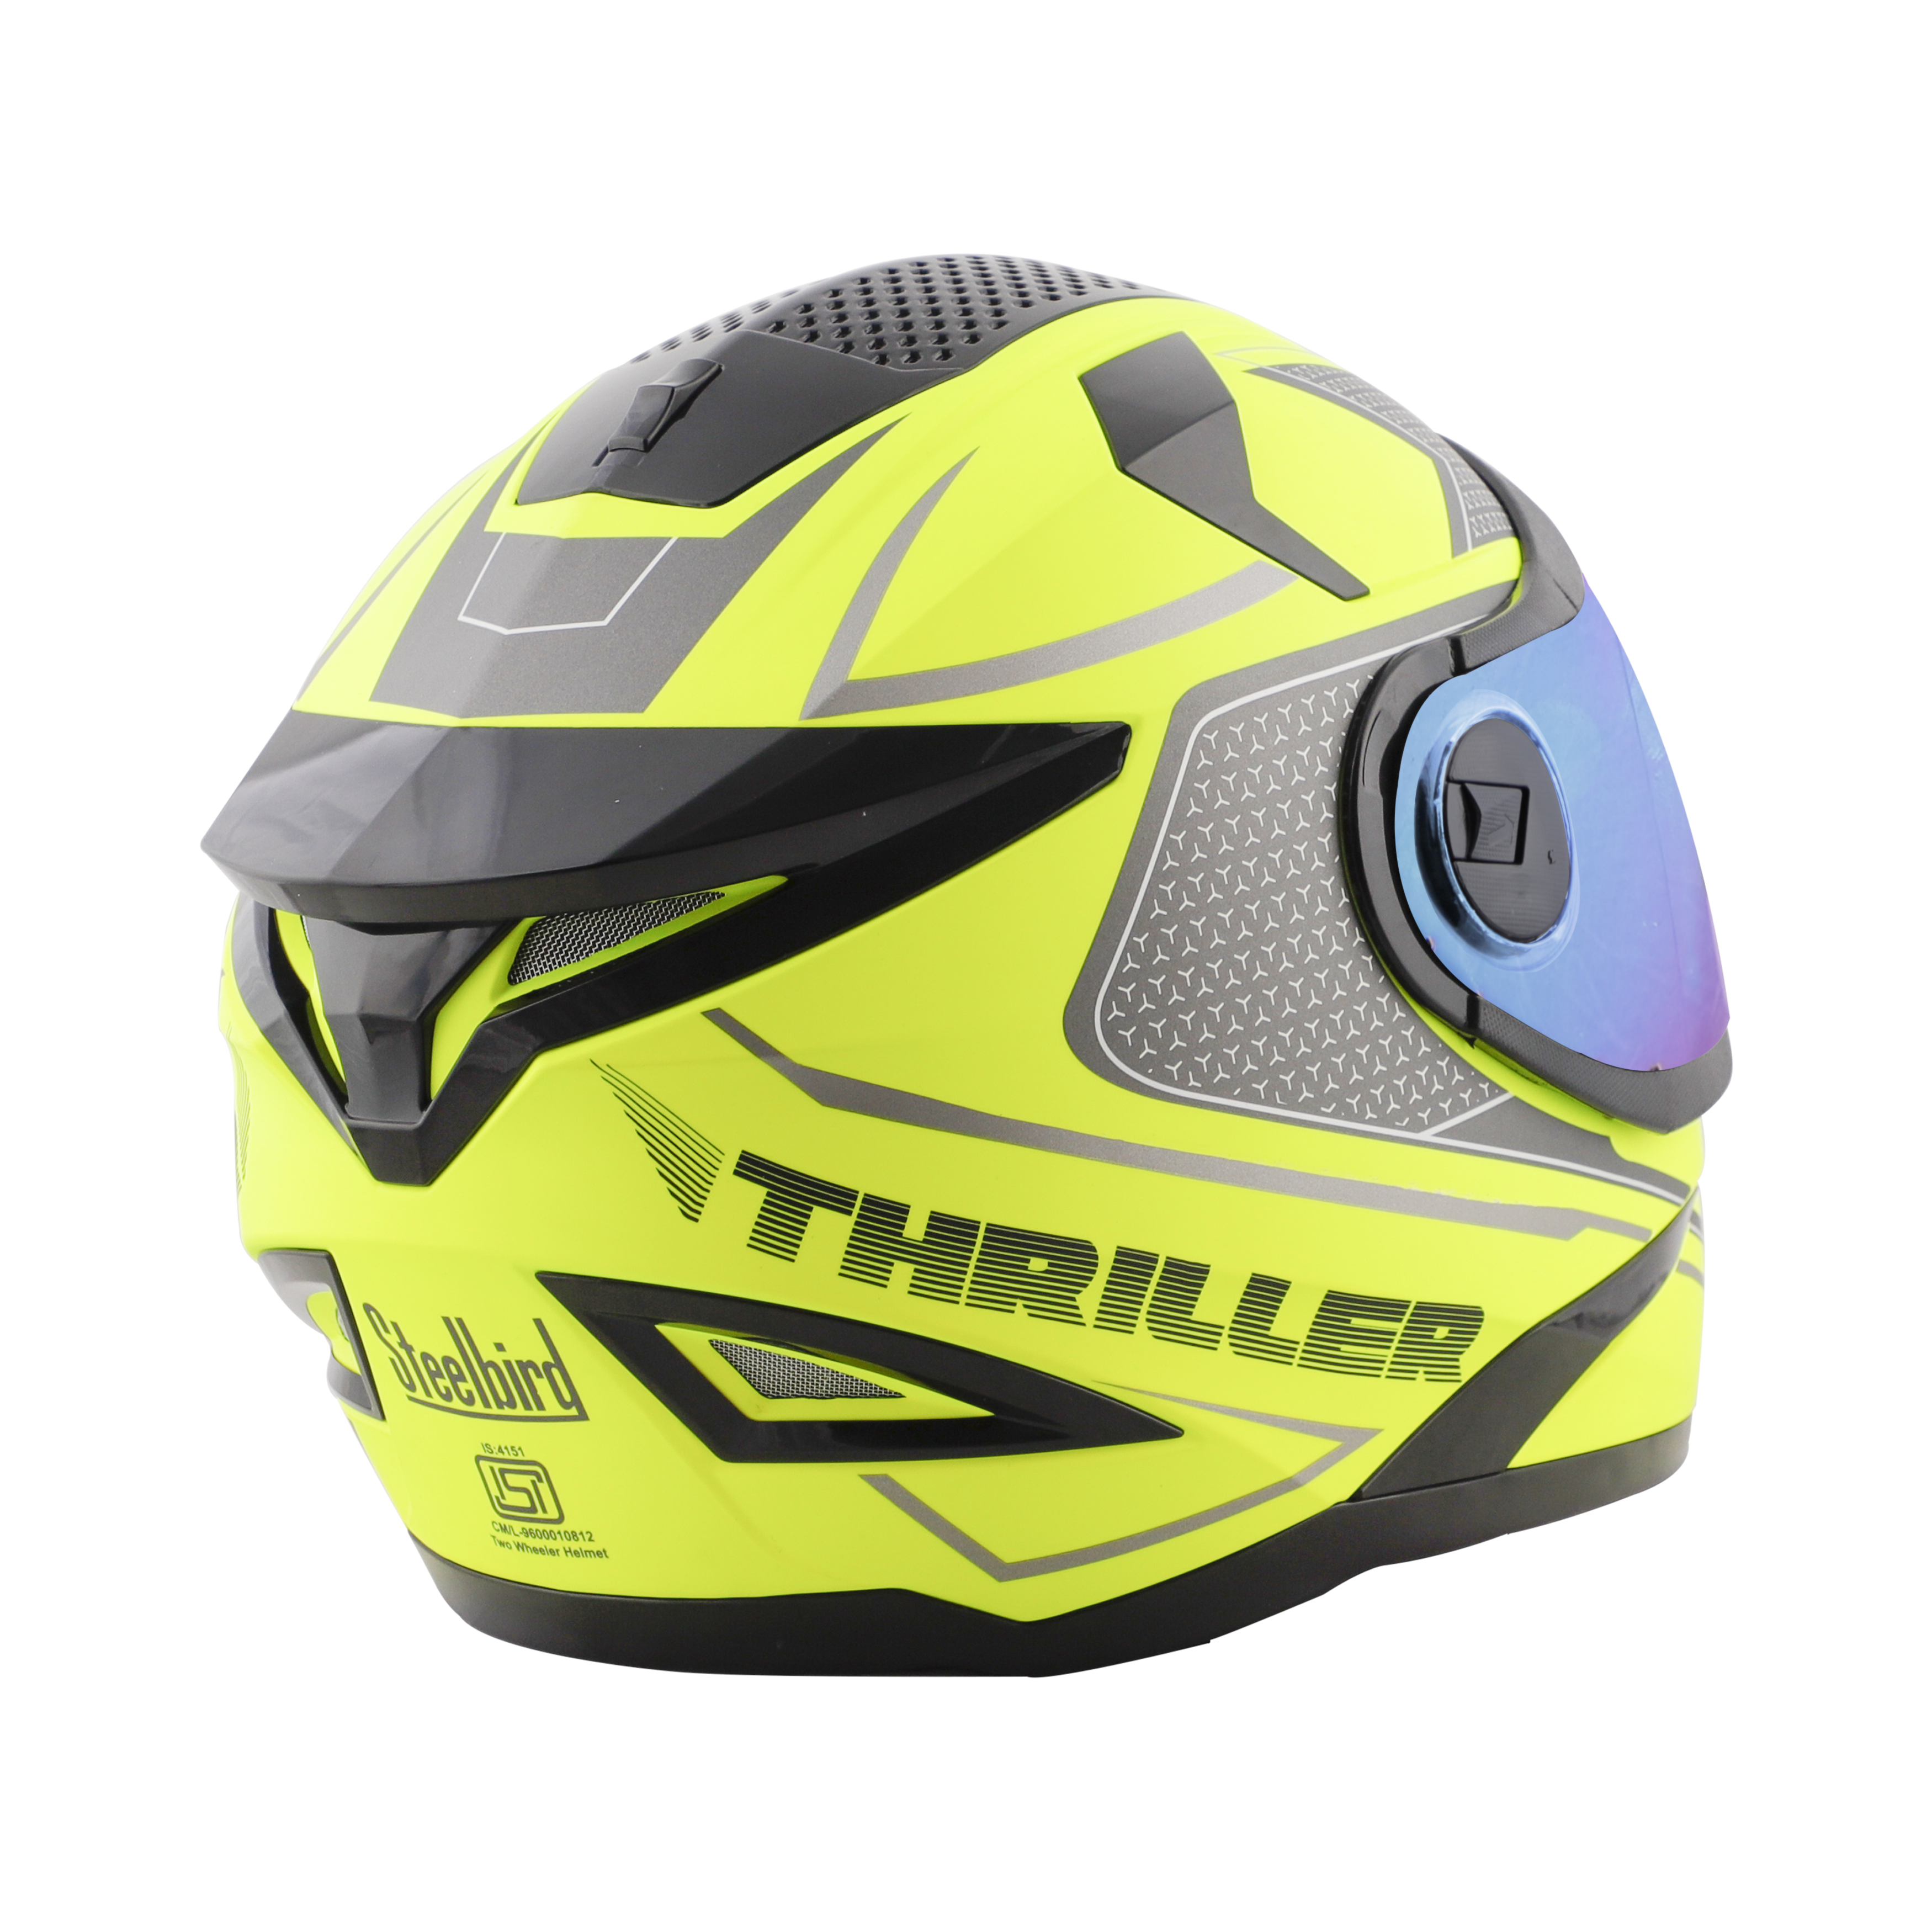 Steelbird SBH-17 Thriller ISI Certified Full Face Graphic Helmet (Glossy Fluo Neon Grey With Chrome Rainbow Visor)